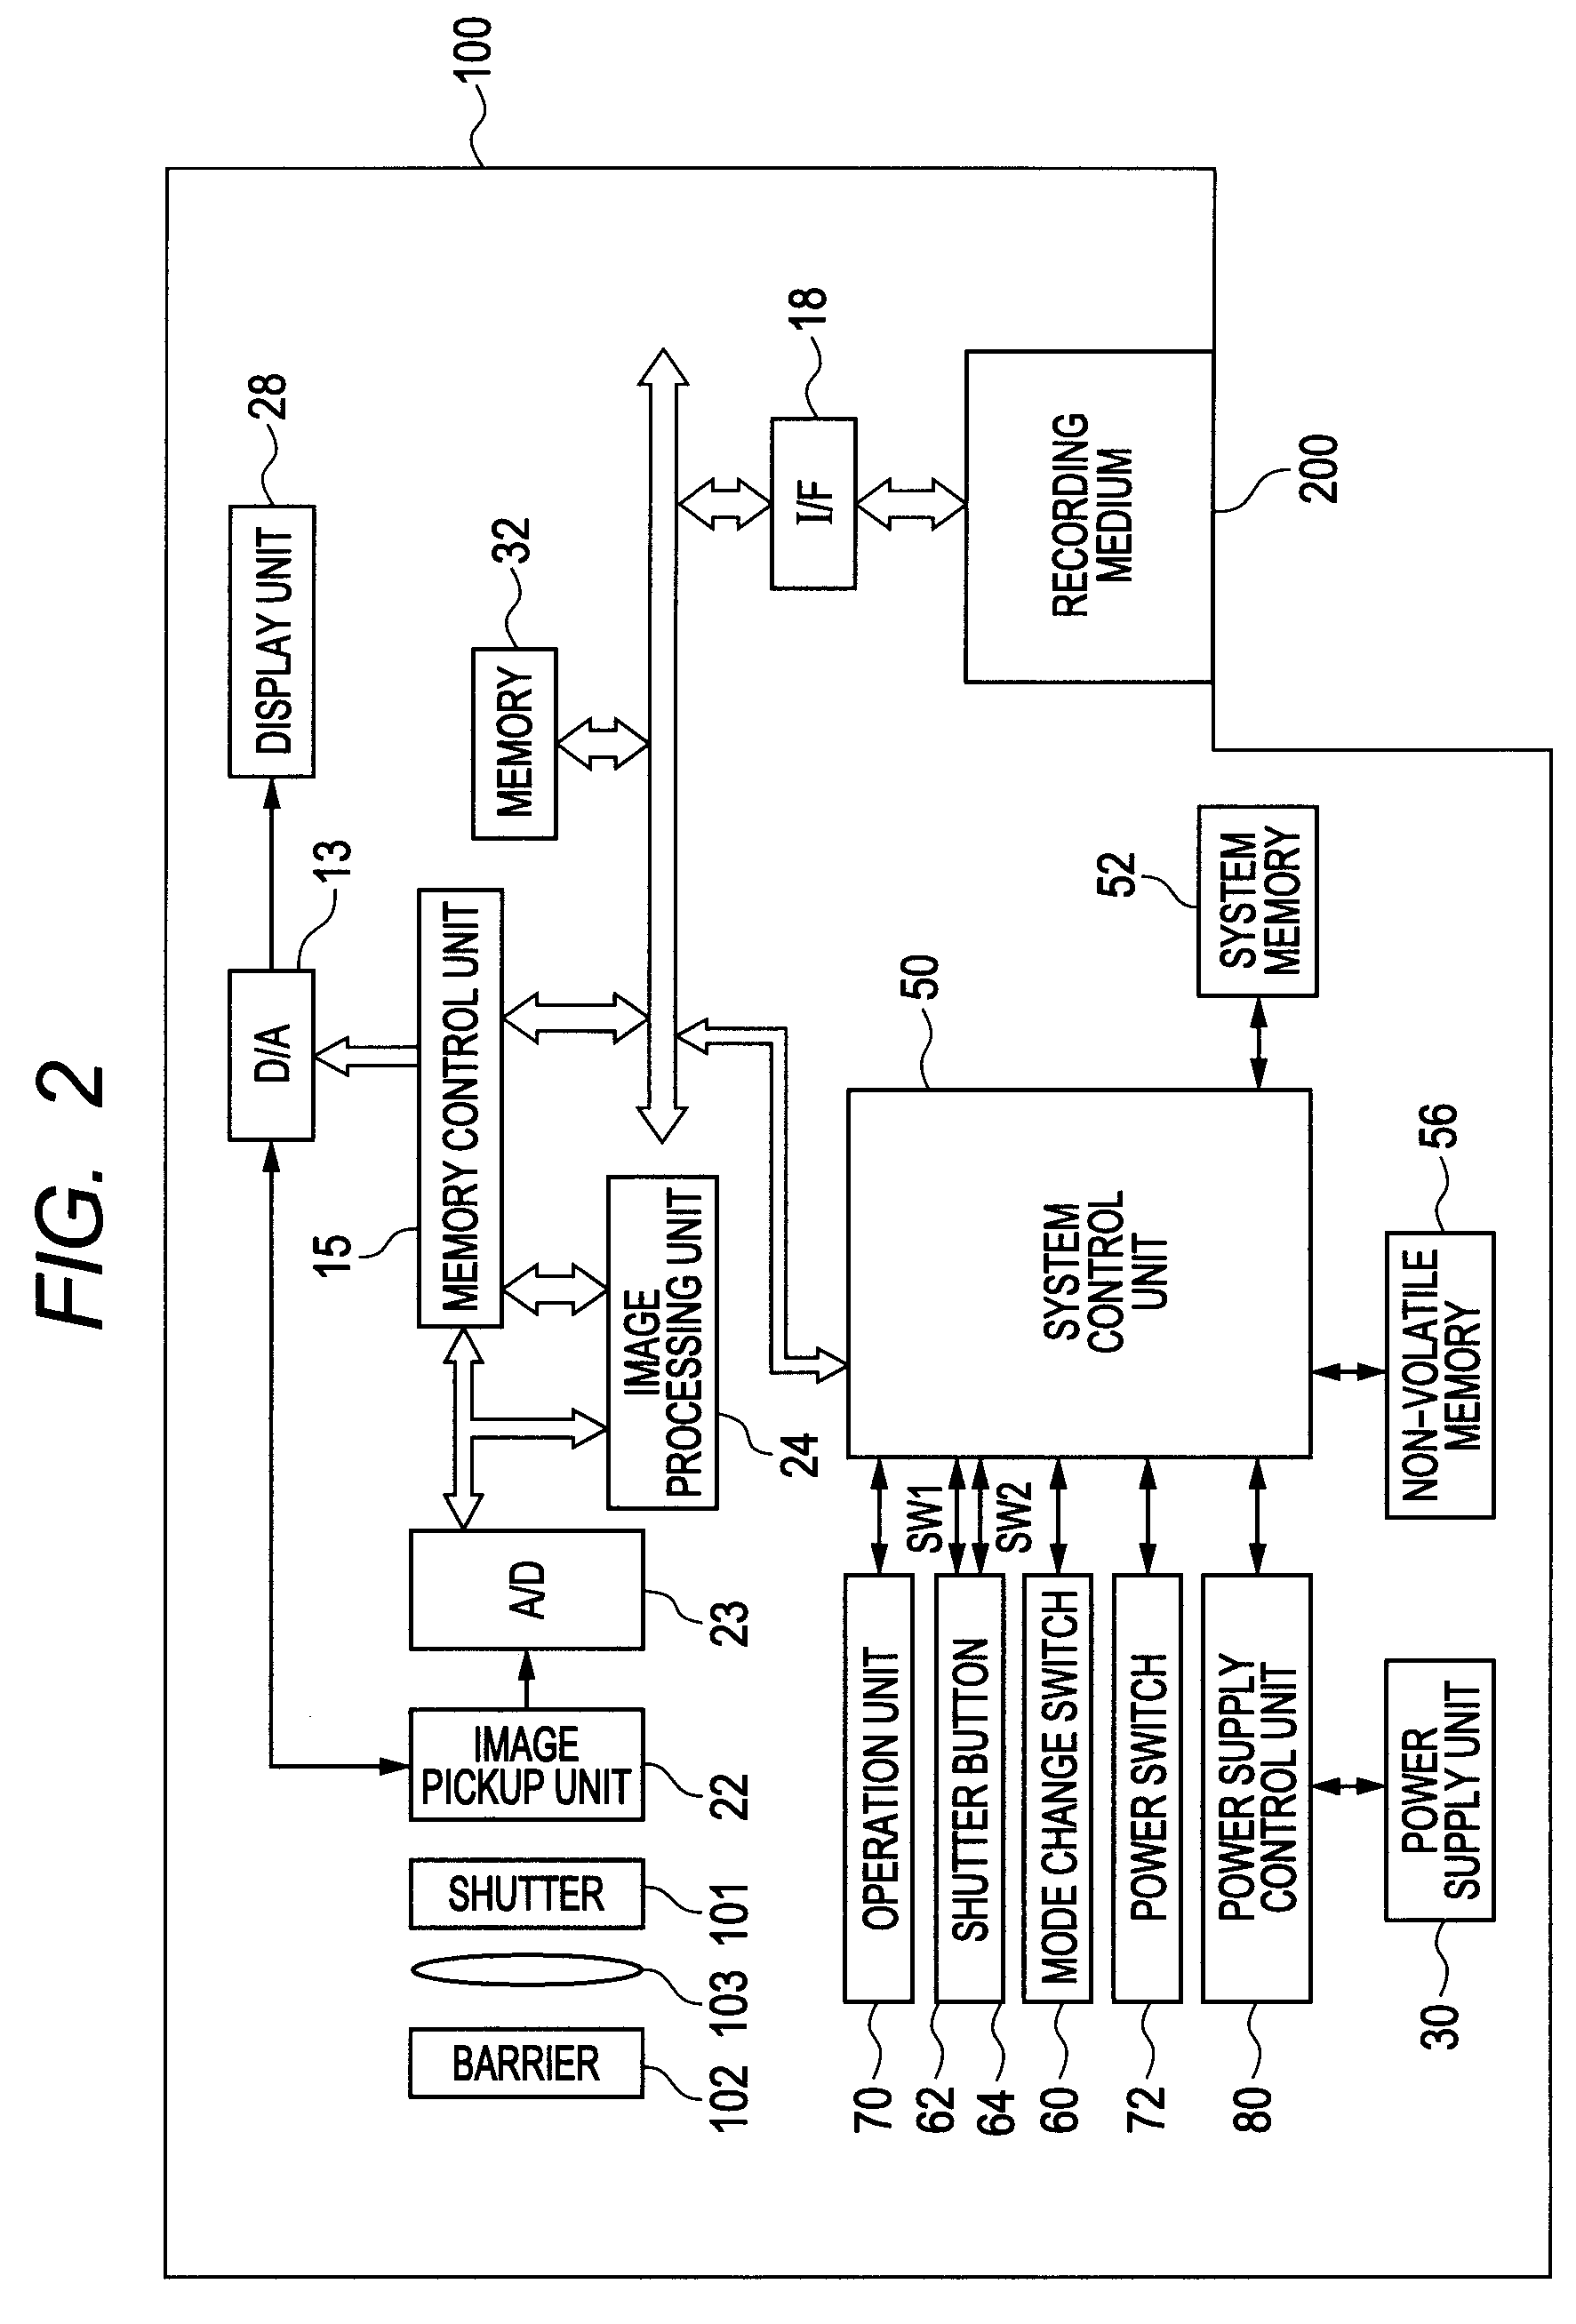 Image pickup apparatus and control method for image pickup apparatus with touch operation member control